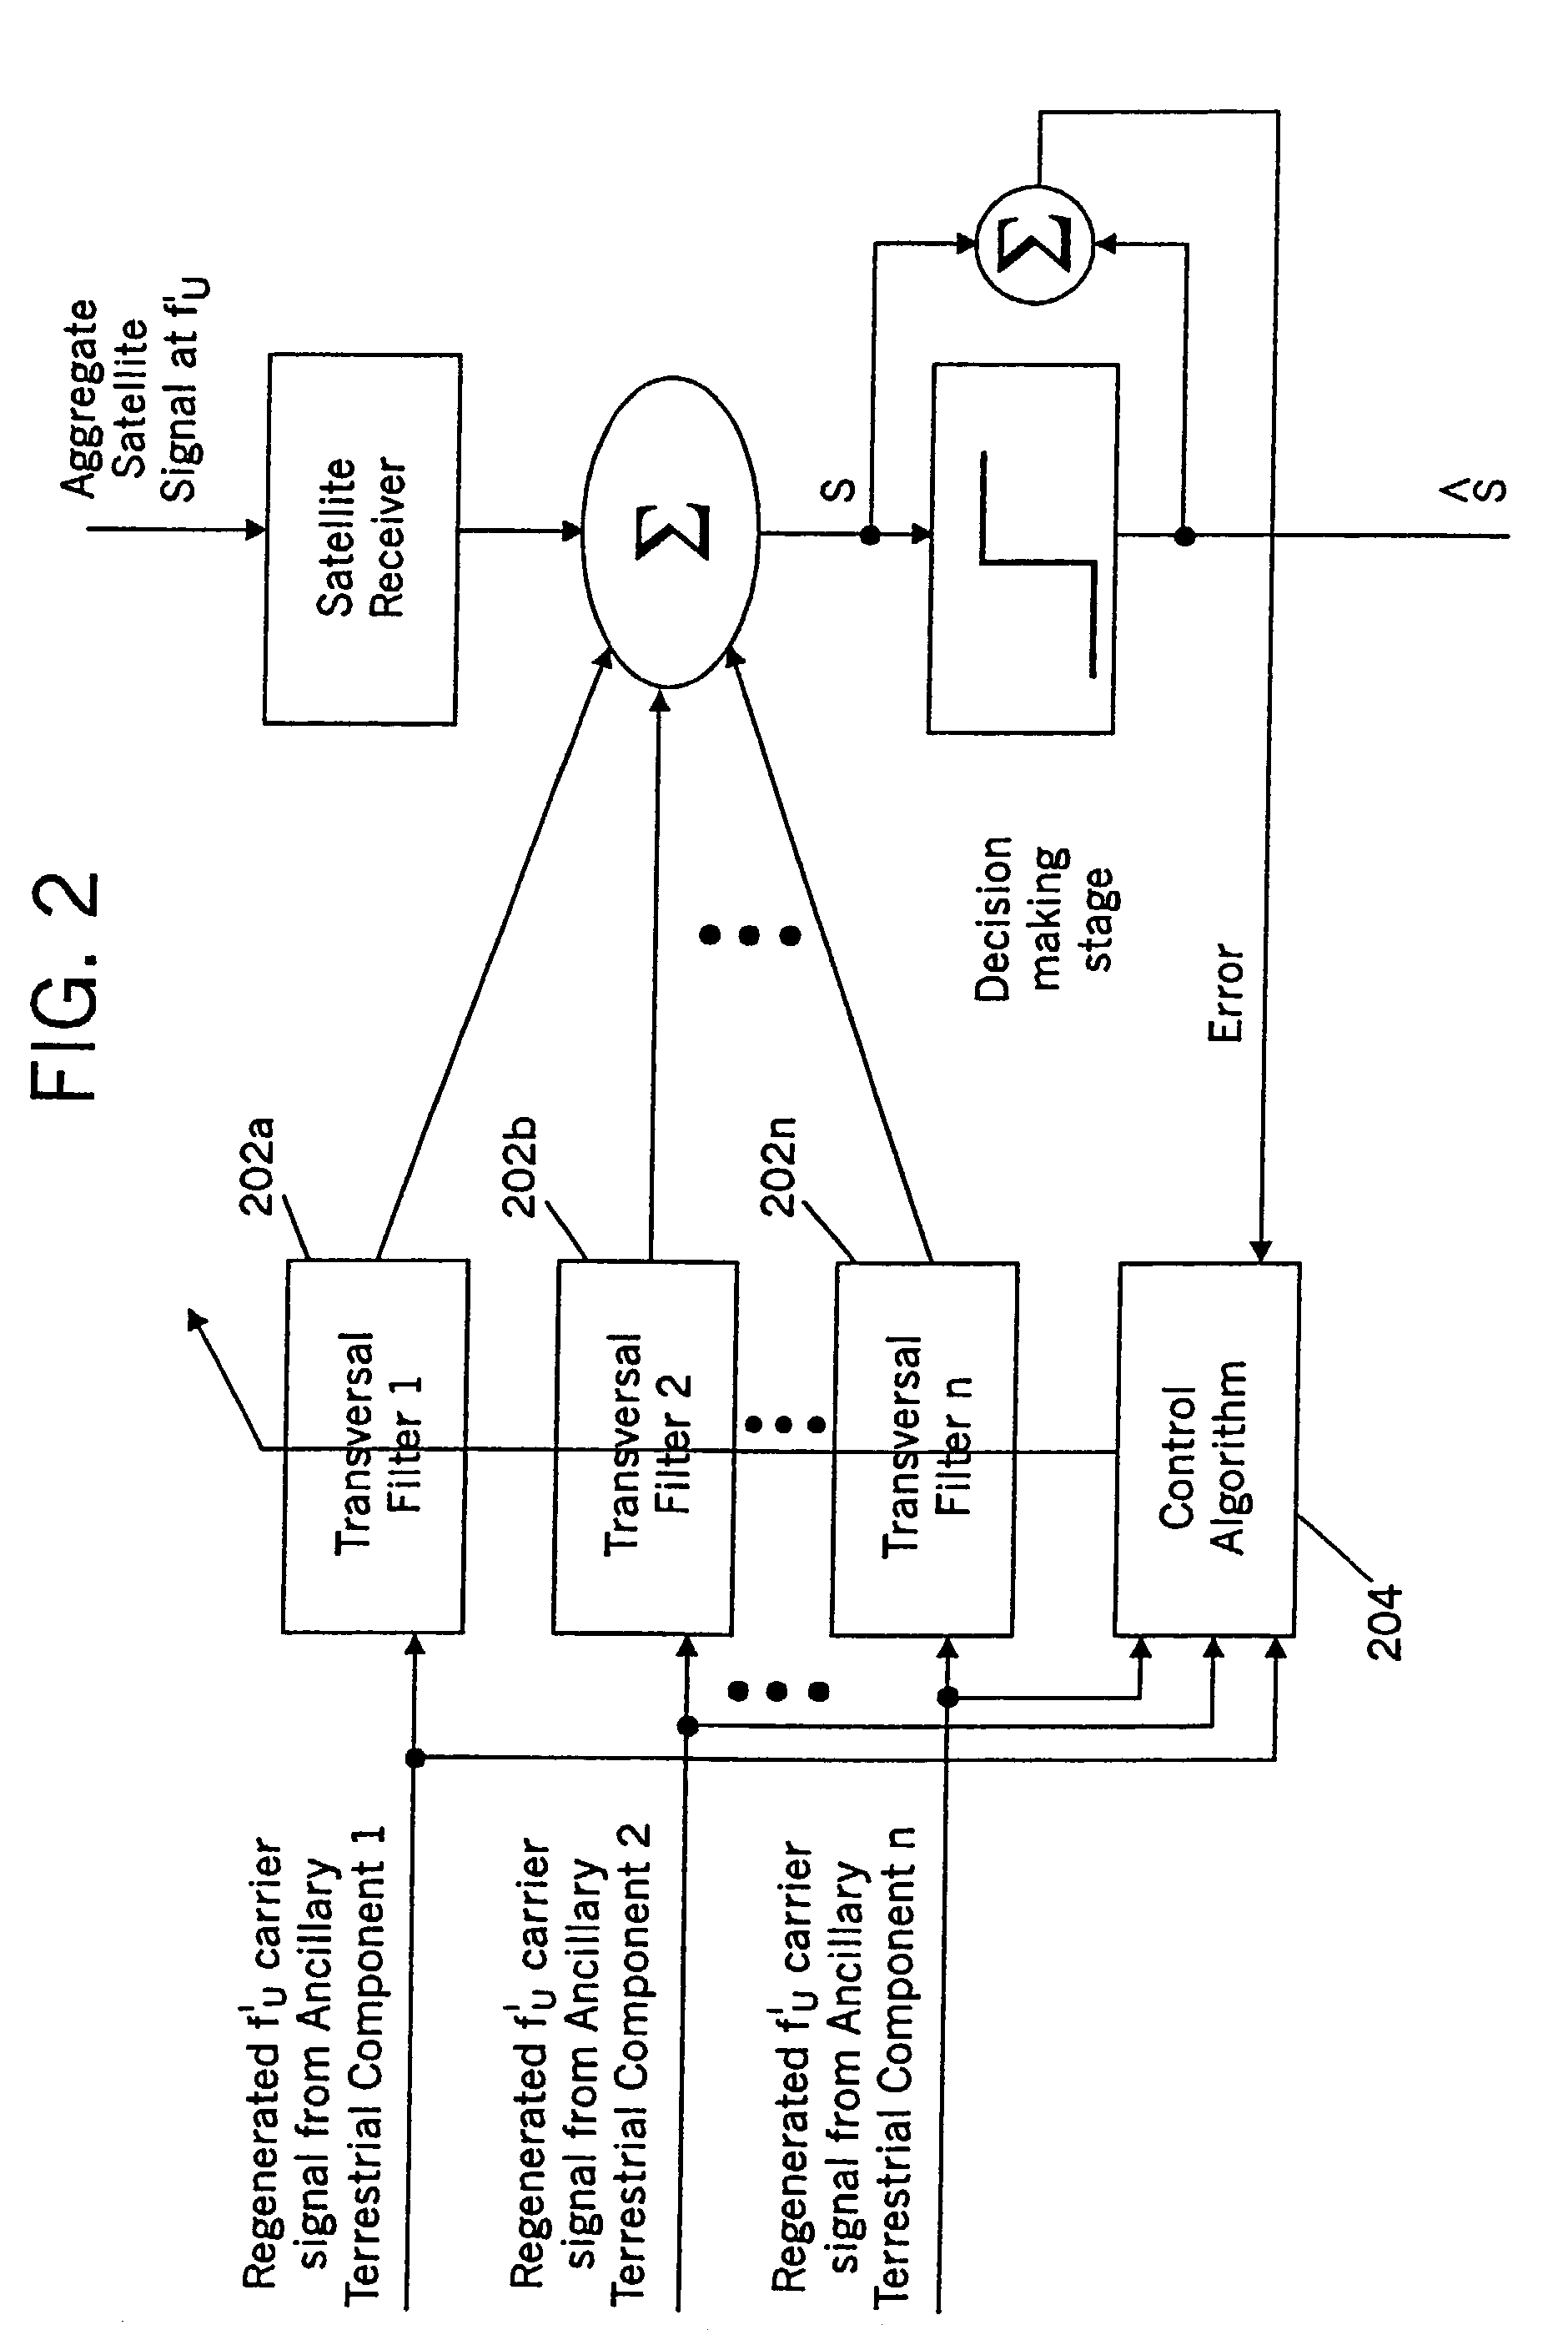 Methods and systems for modifying satellite antenna cell patterns in response to terrestrial reuse of satellite frequencies